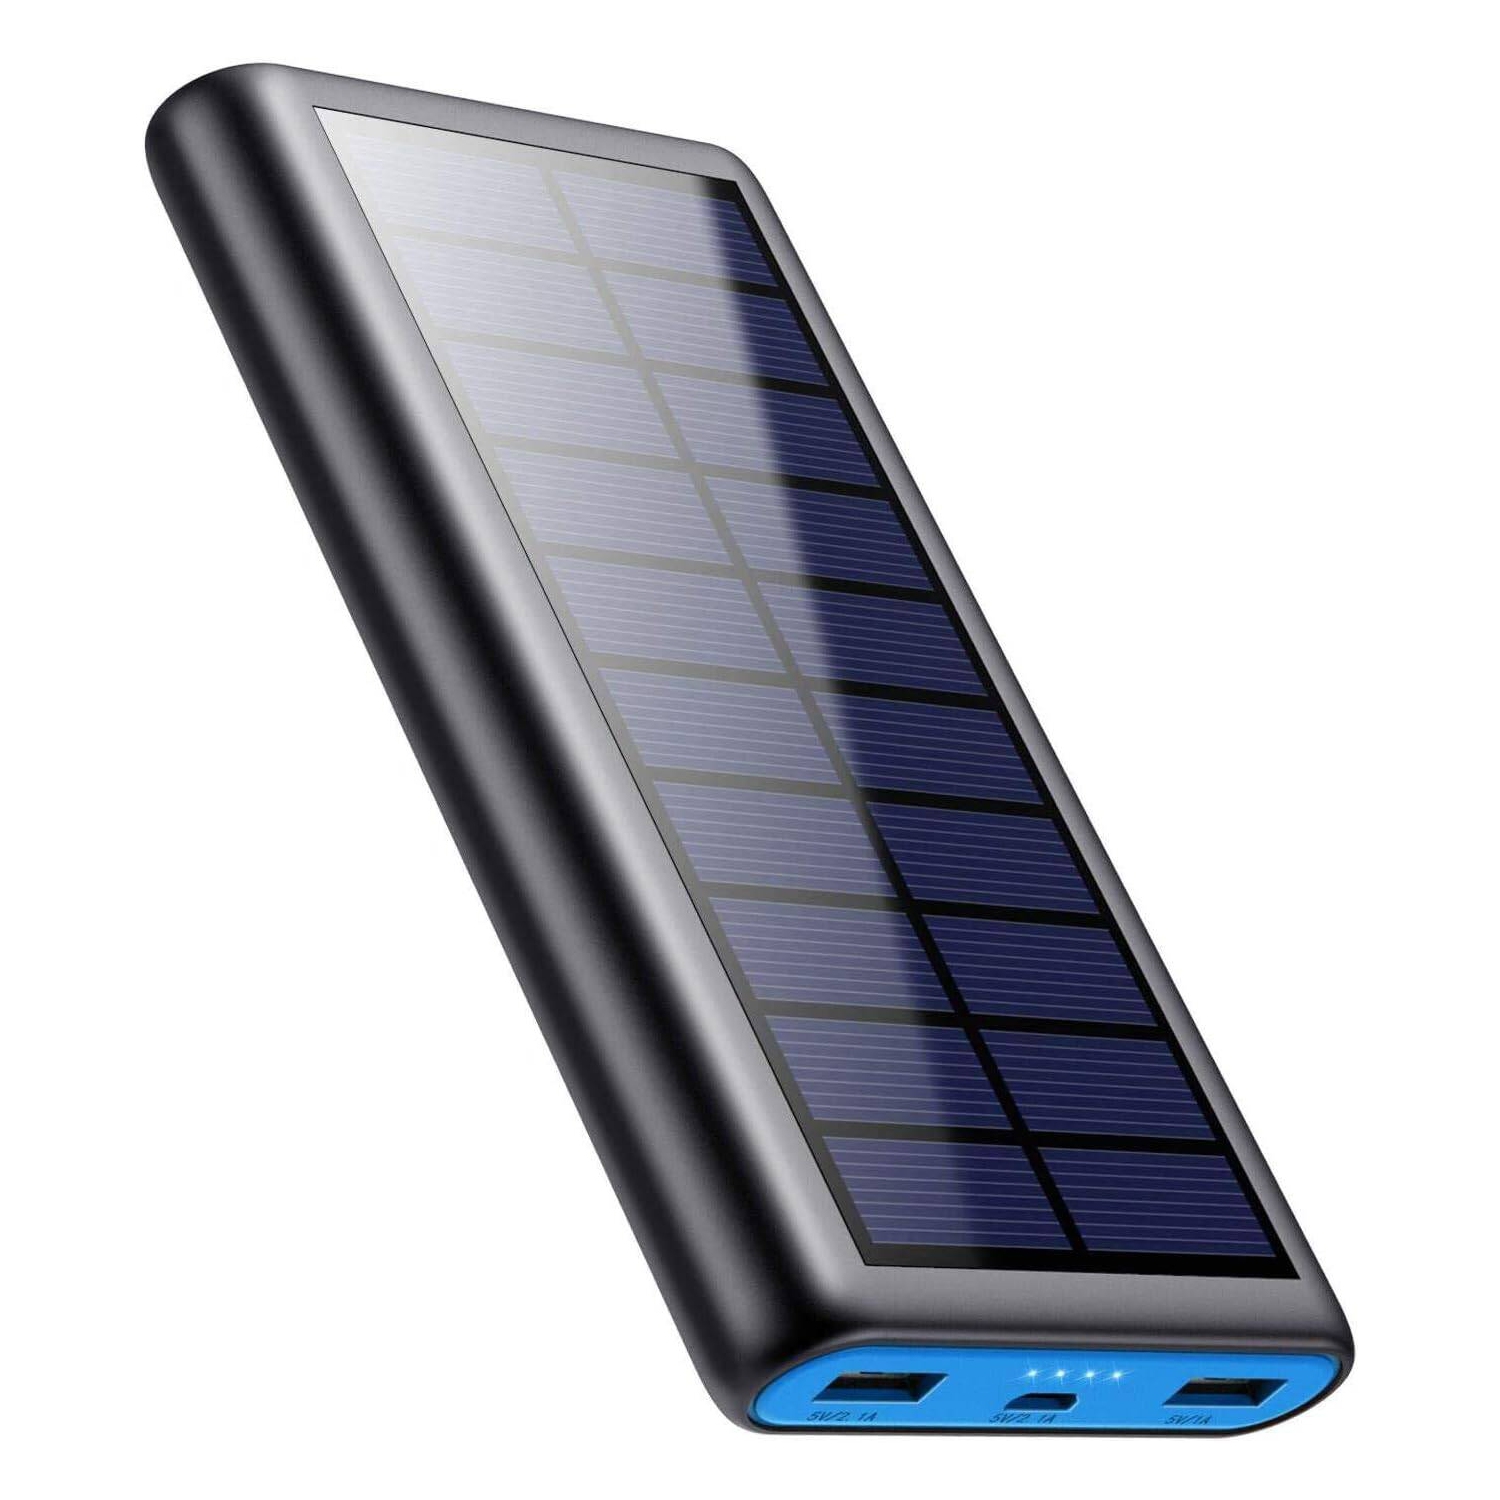 Solar Charger Power Bank 26800mah, 2 USB Output Fast Phone Portable Charger Power Bank Solar Battery Bank Cell Phone for iPhone, iPad Tablet, Samsung Galaxy Android